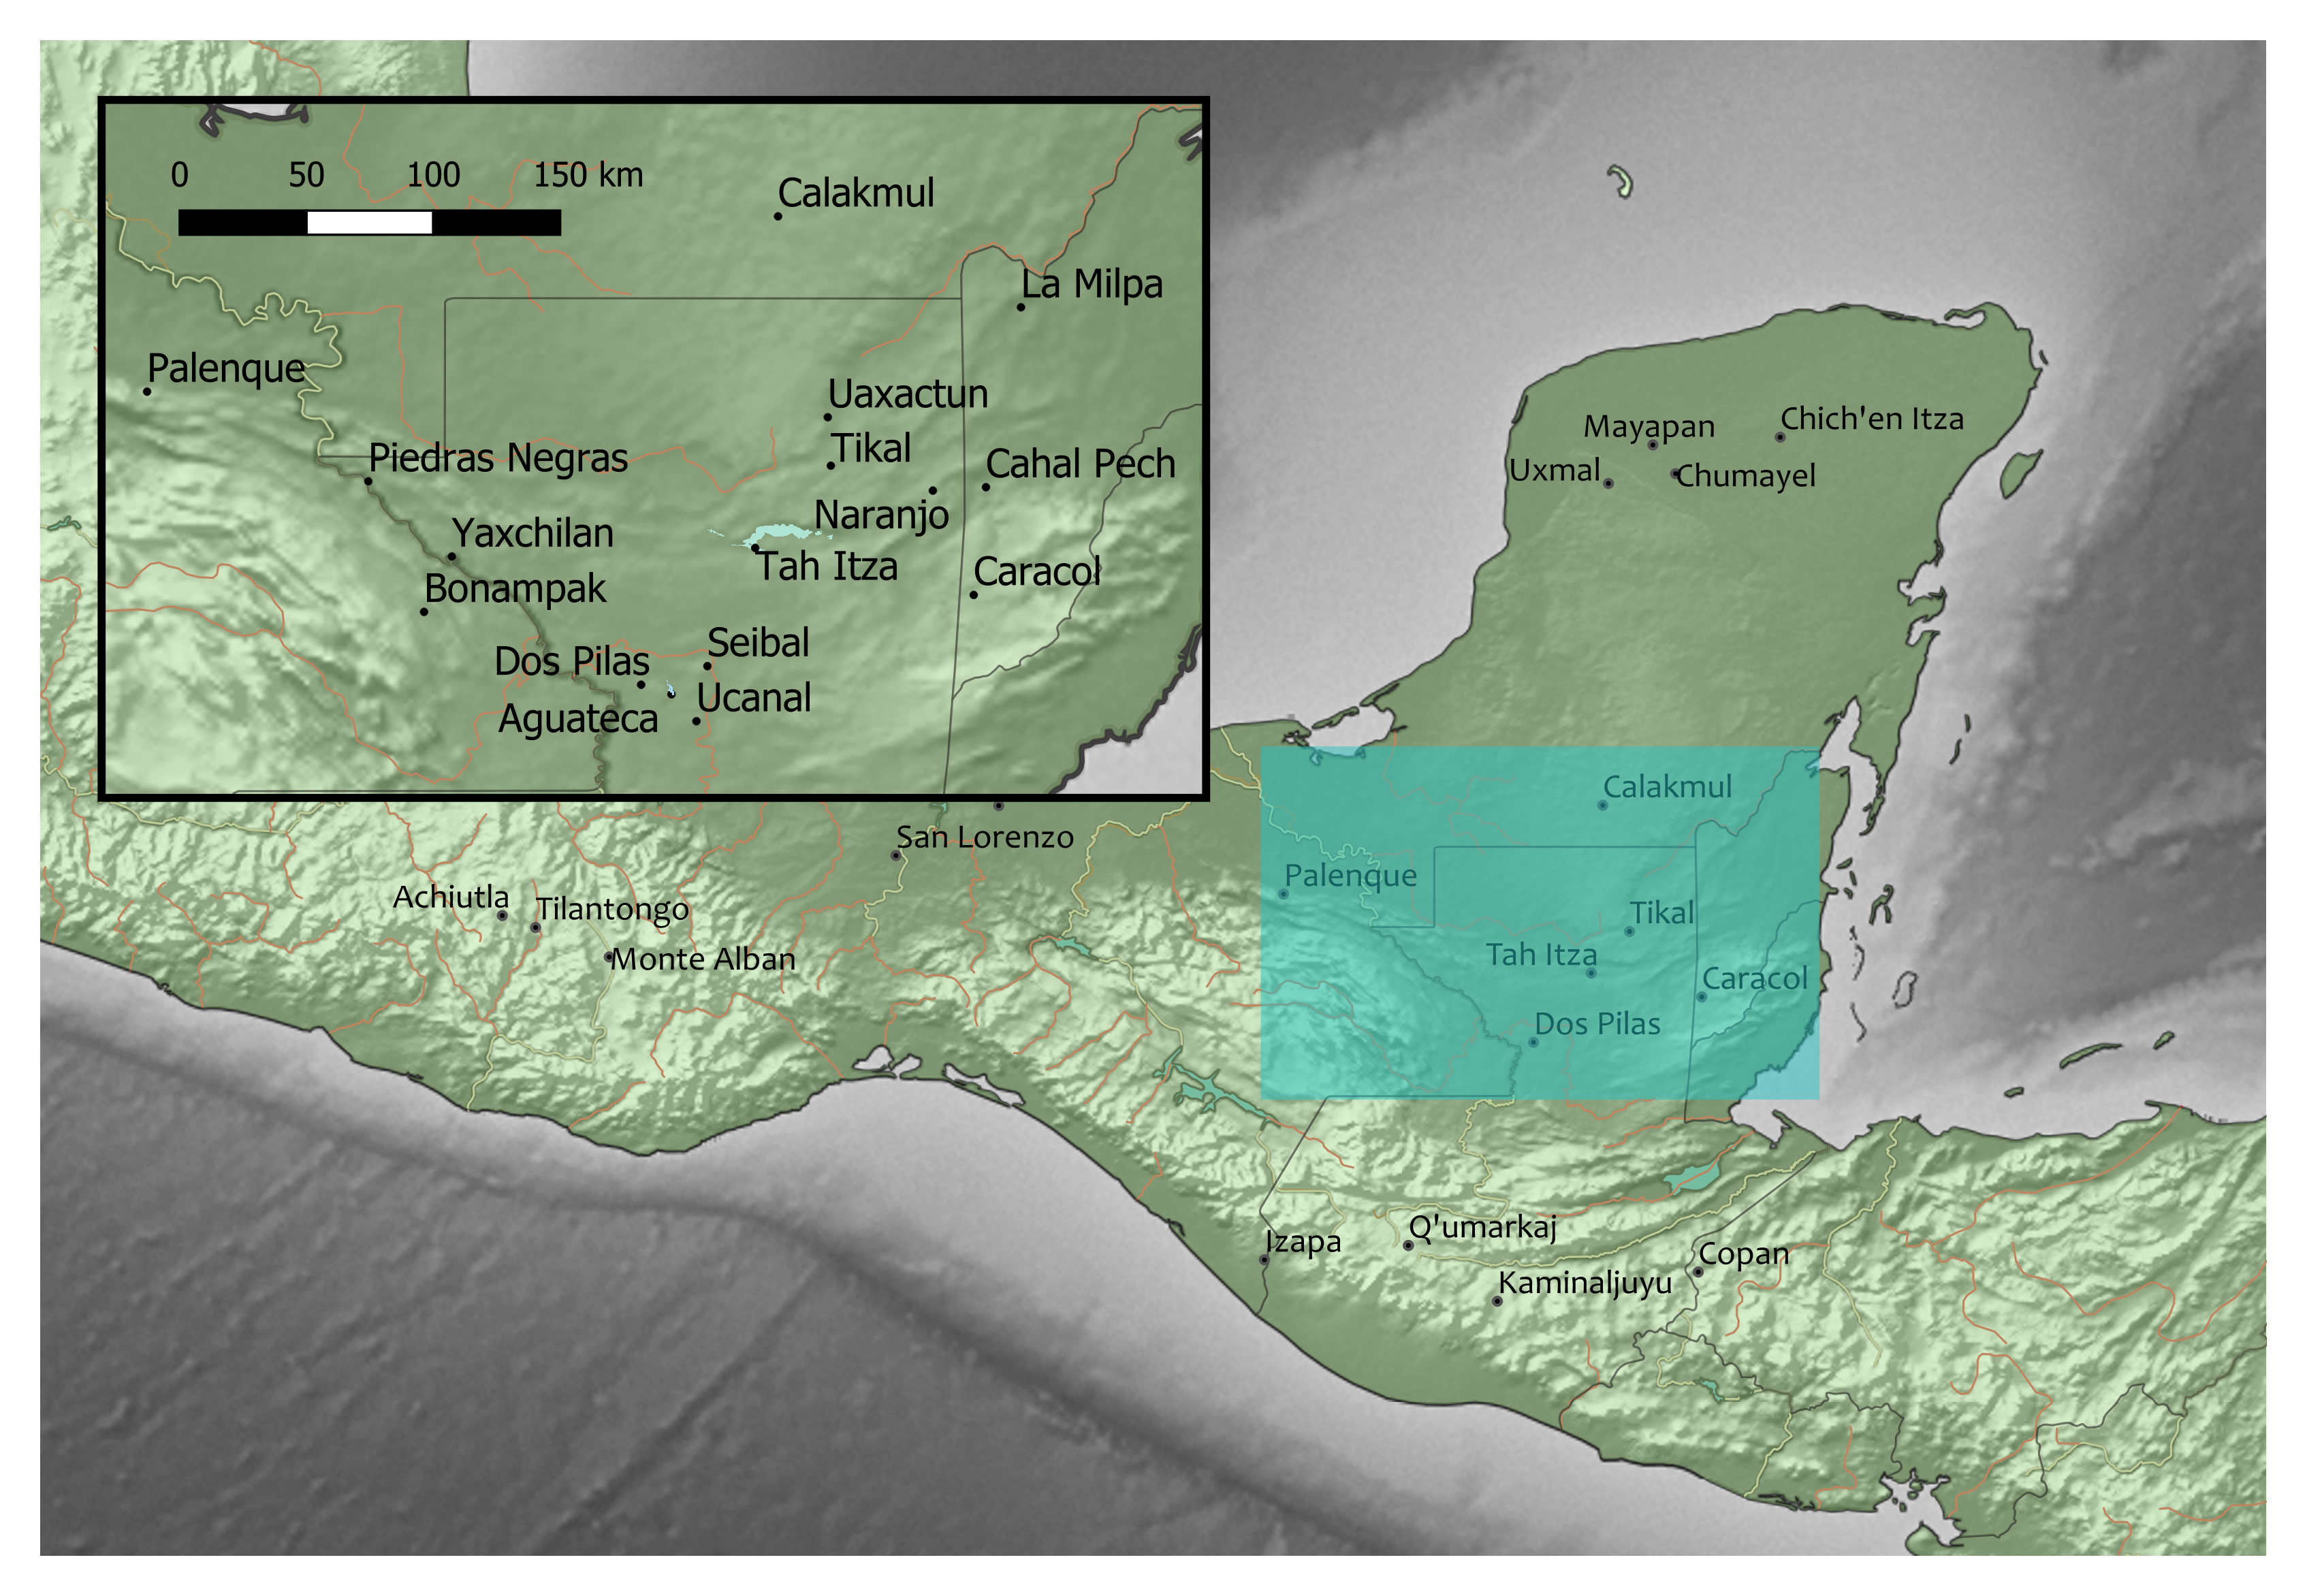 Map of Mayan region, with rectangle showing Peten region in more detail